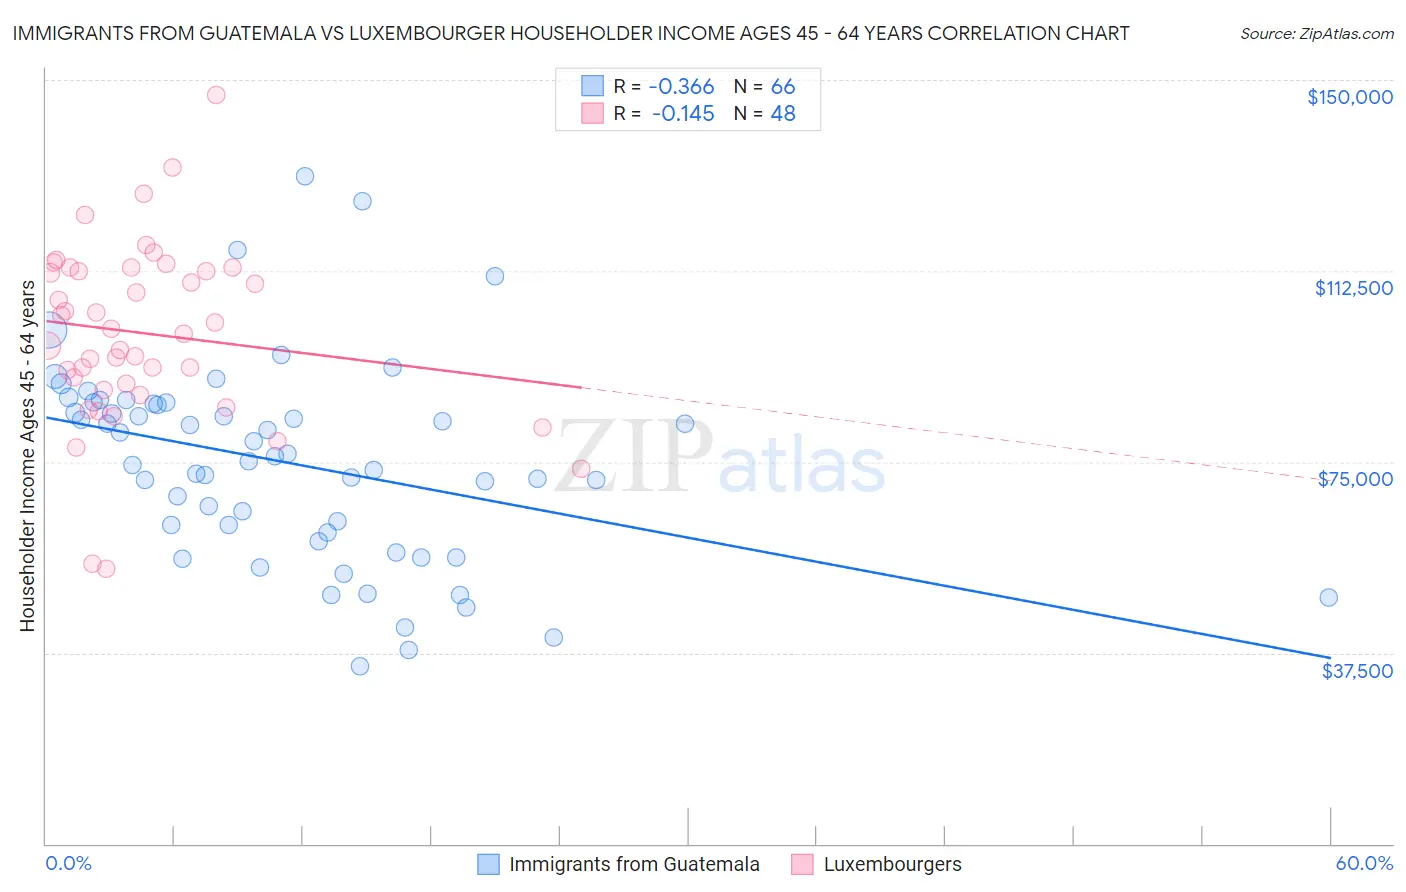 Immigrants from Guatemala vs Luxembourger Householder Income Ages 45 - 64 years